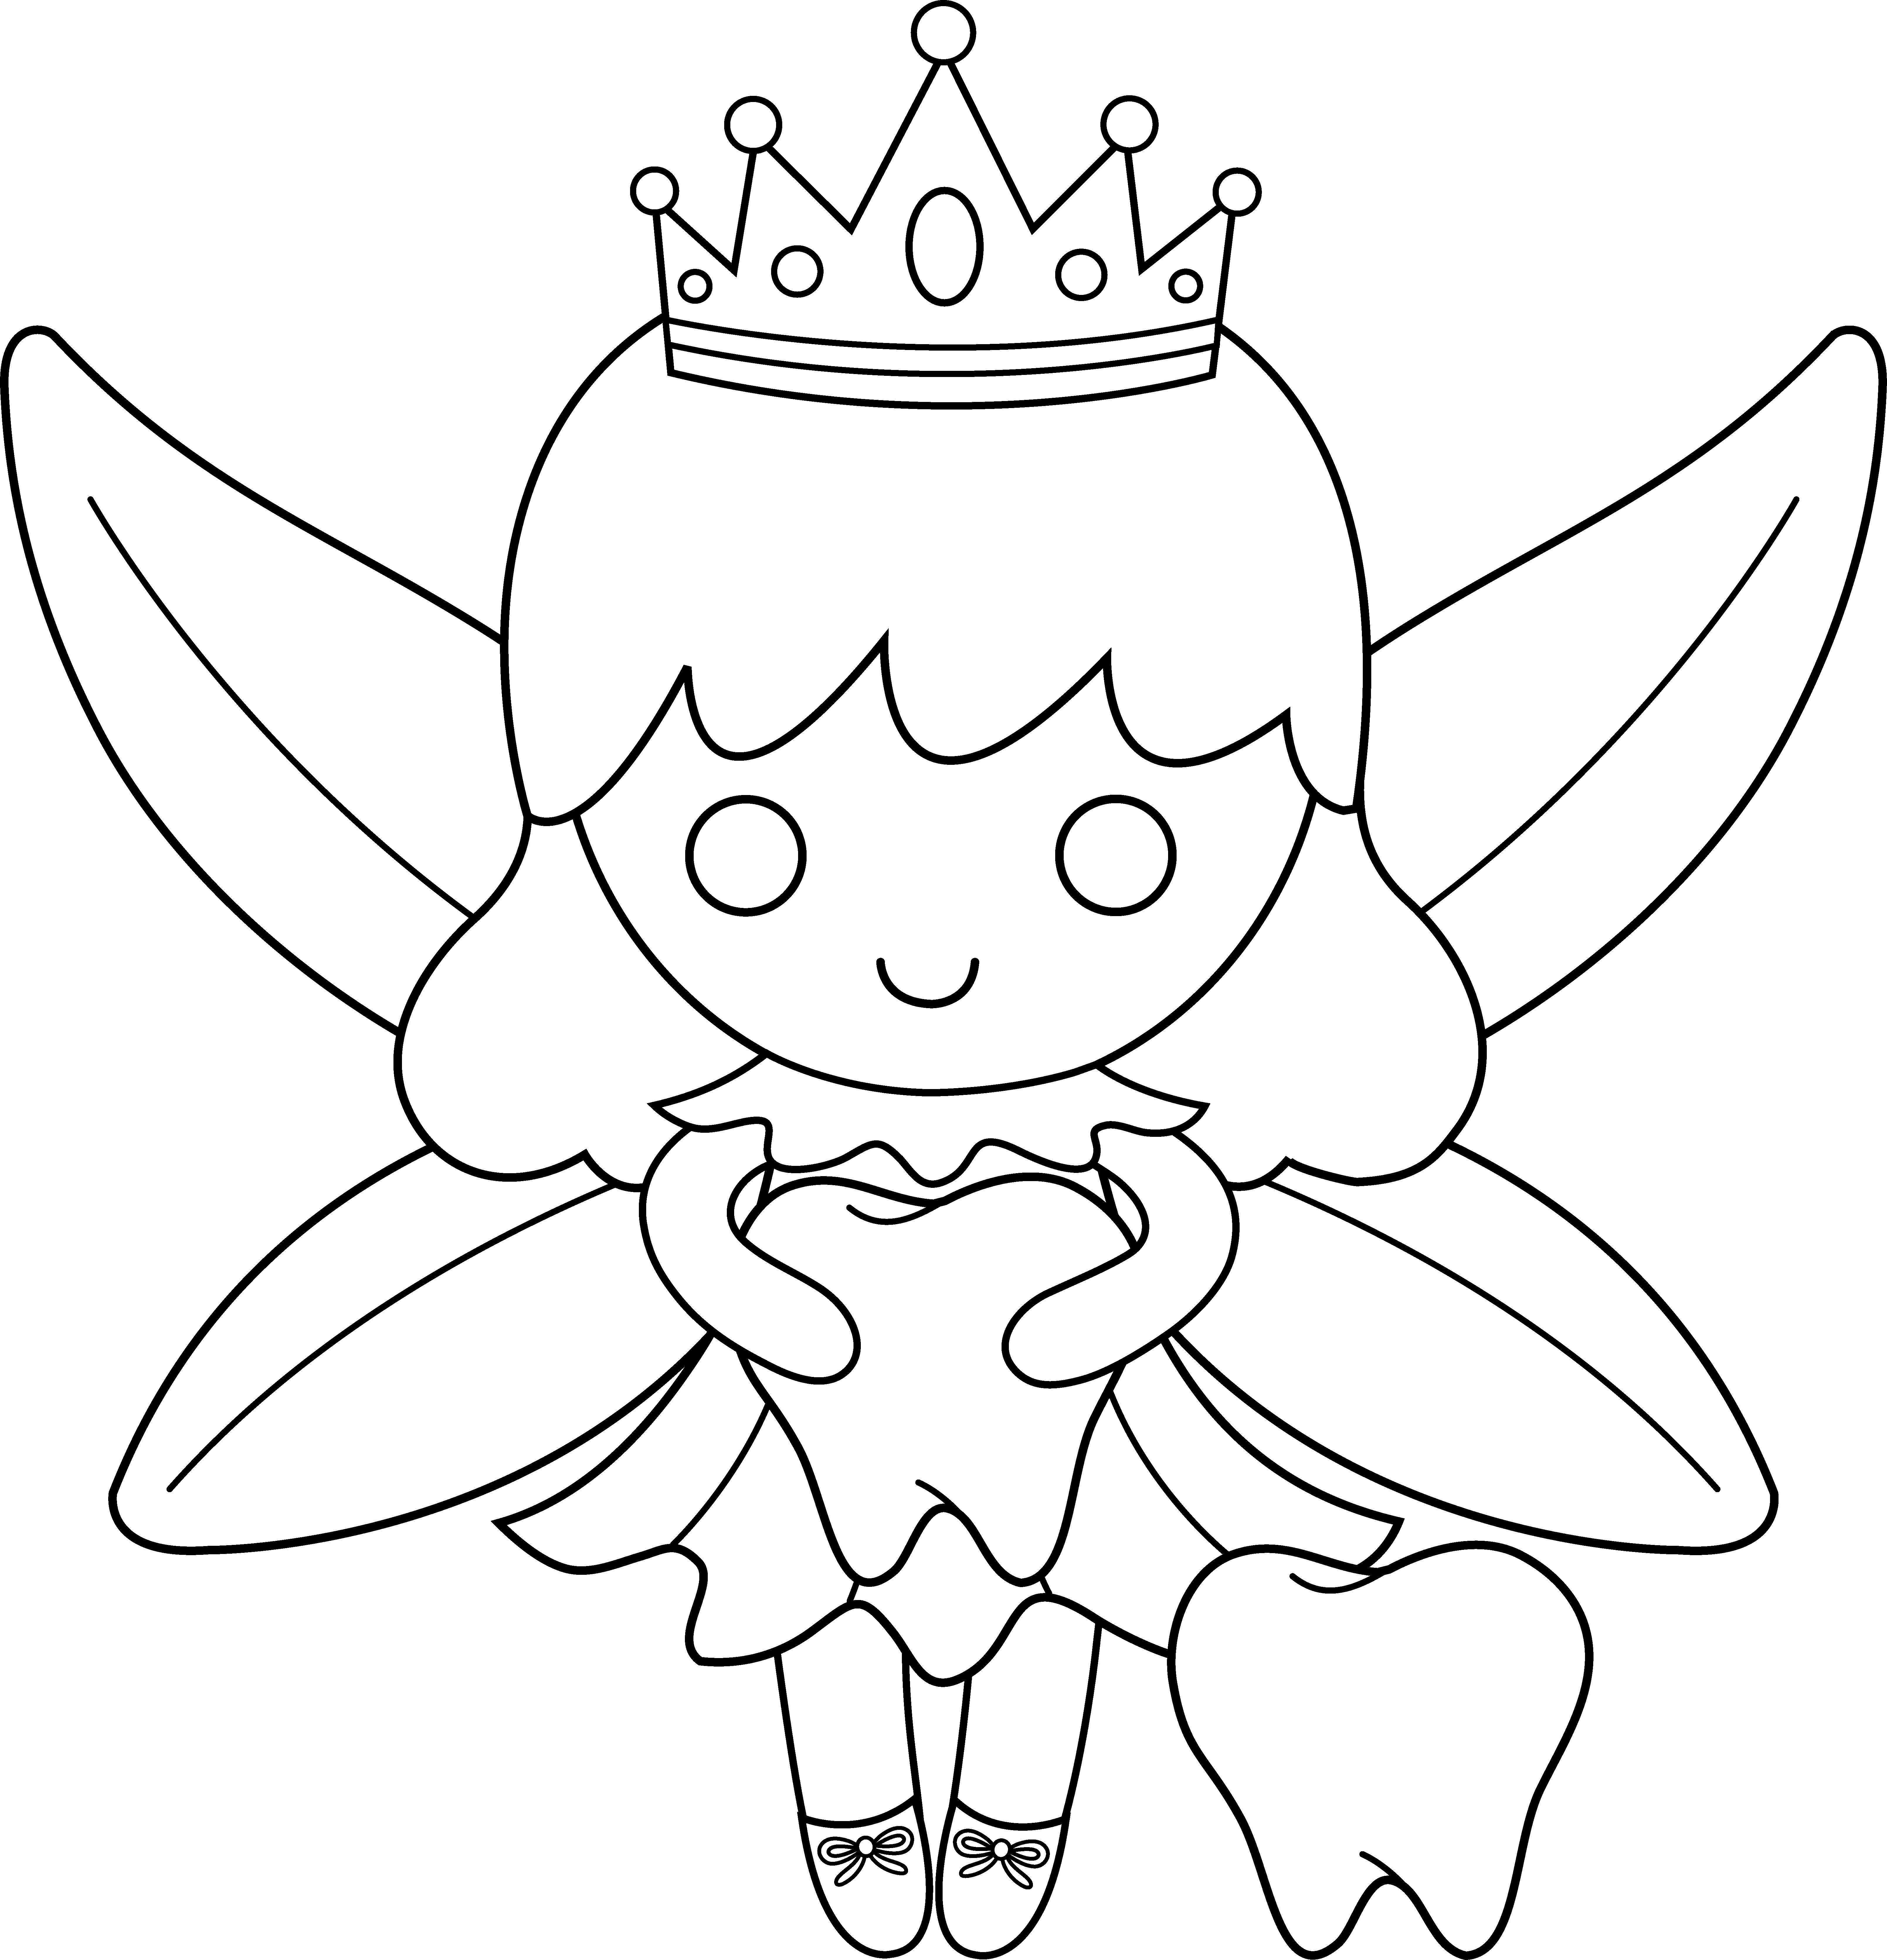 Free Cartoon Fairy Pictures, Download Free Cartoon Fairy Pictures png